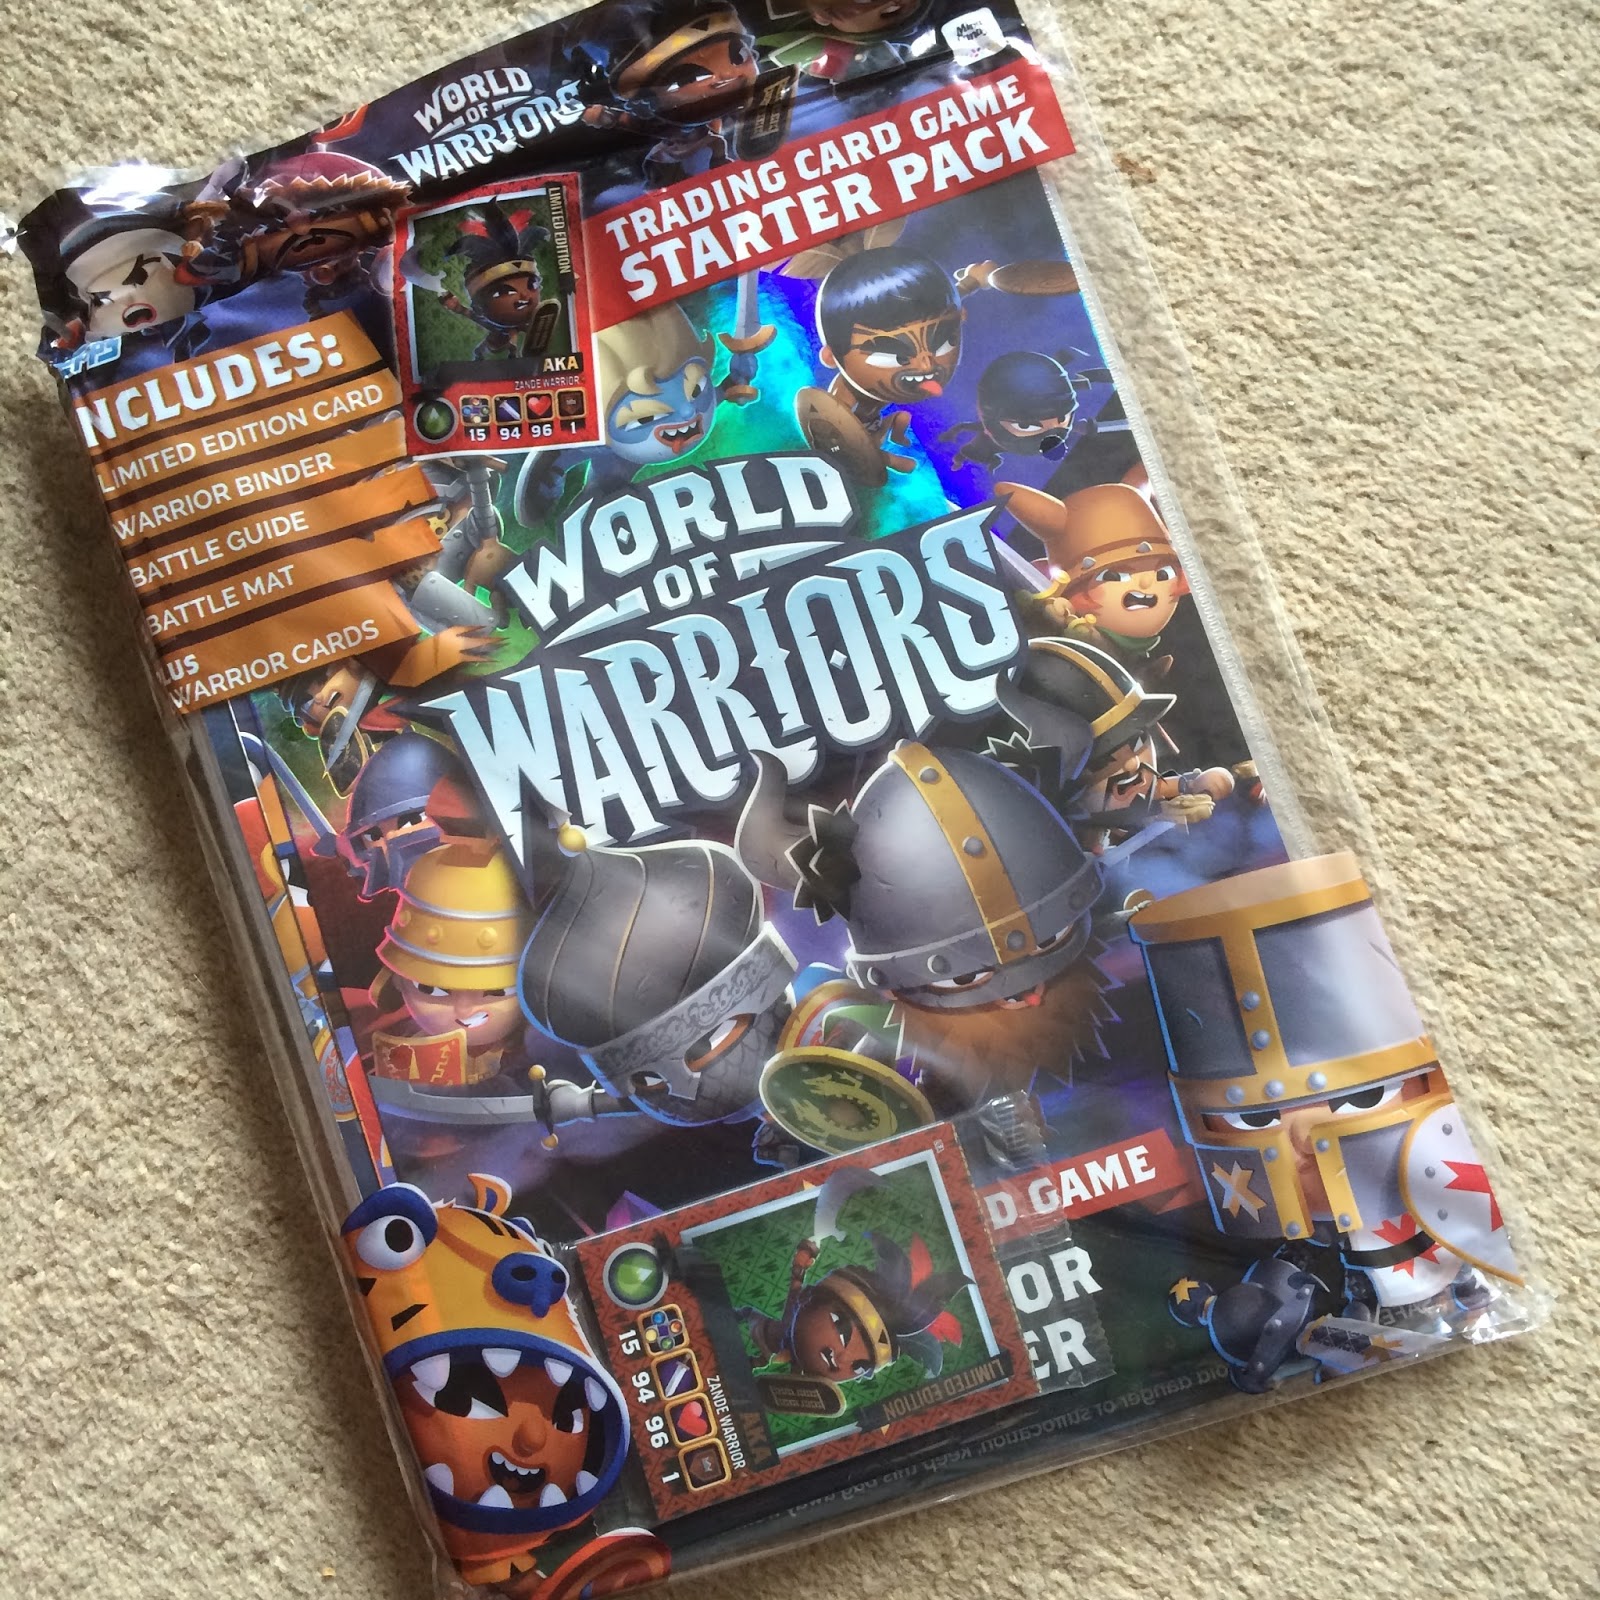 Love World of Warriors online gaming app? Check out this ...